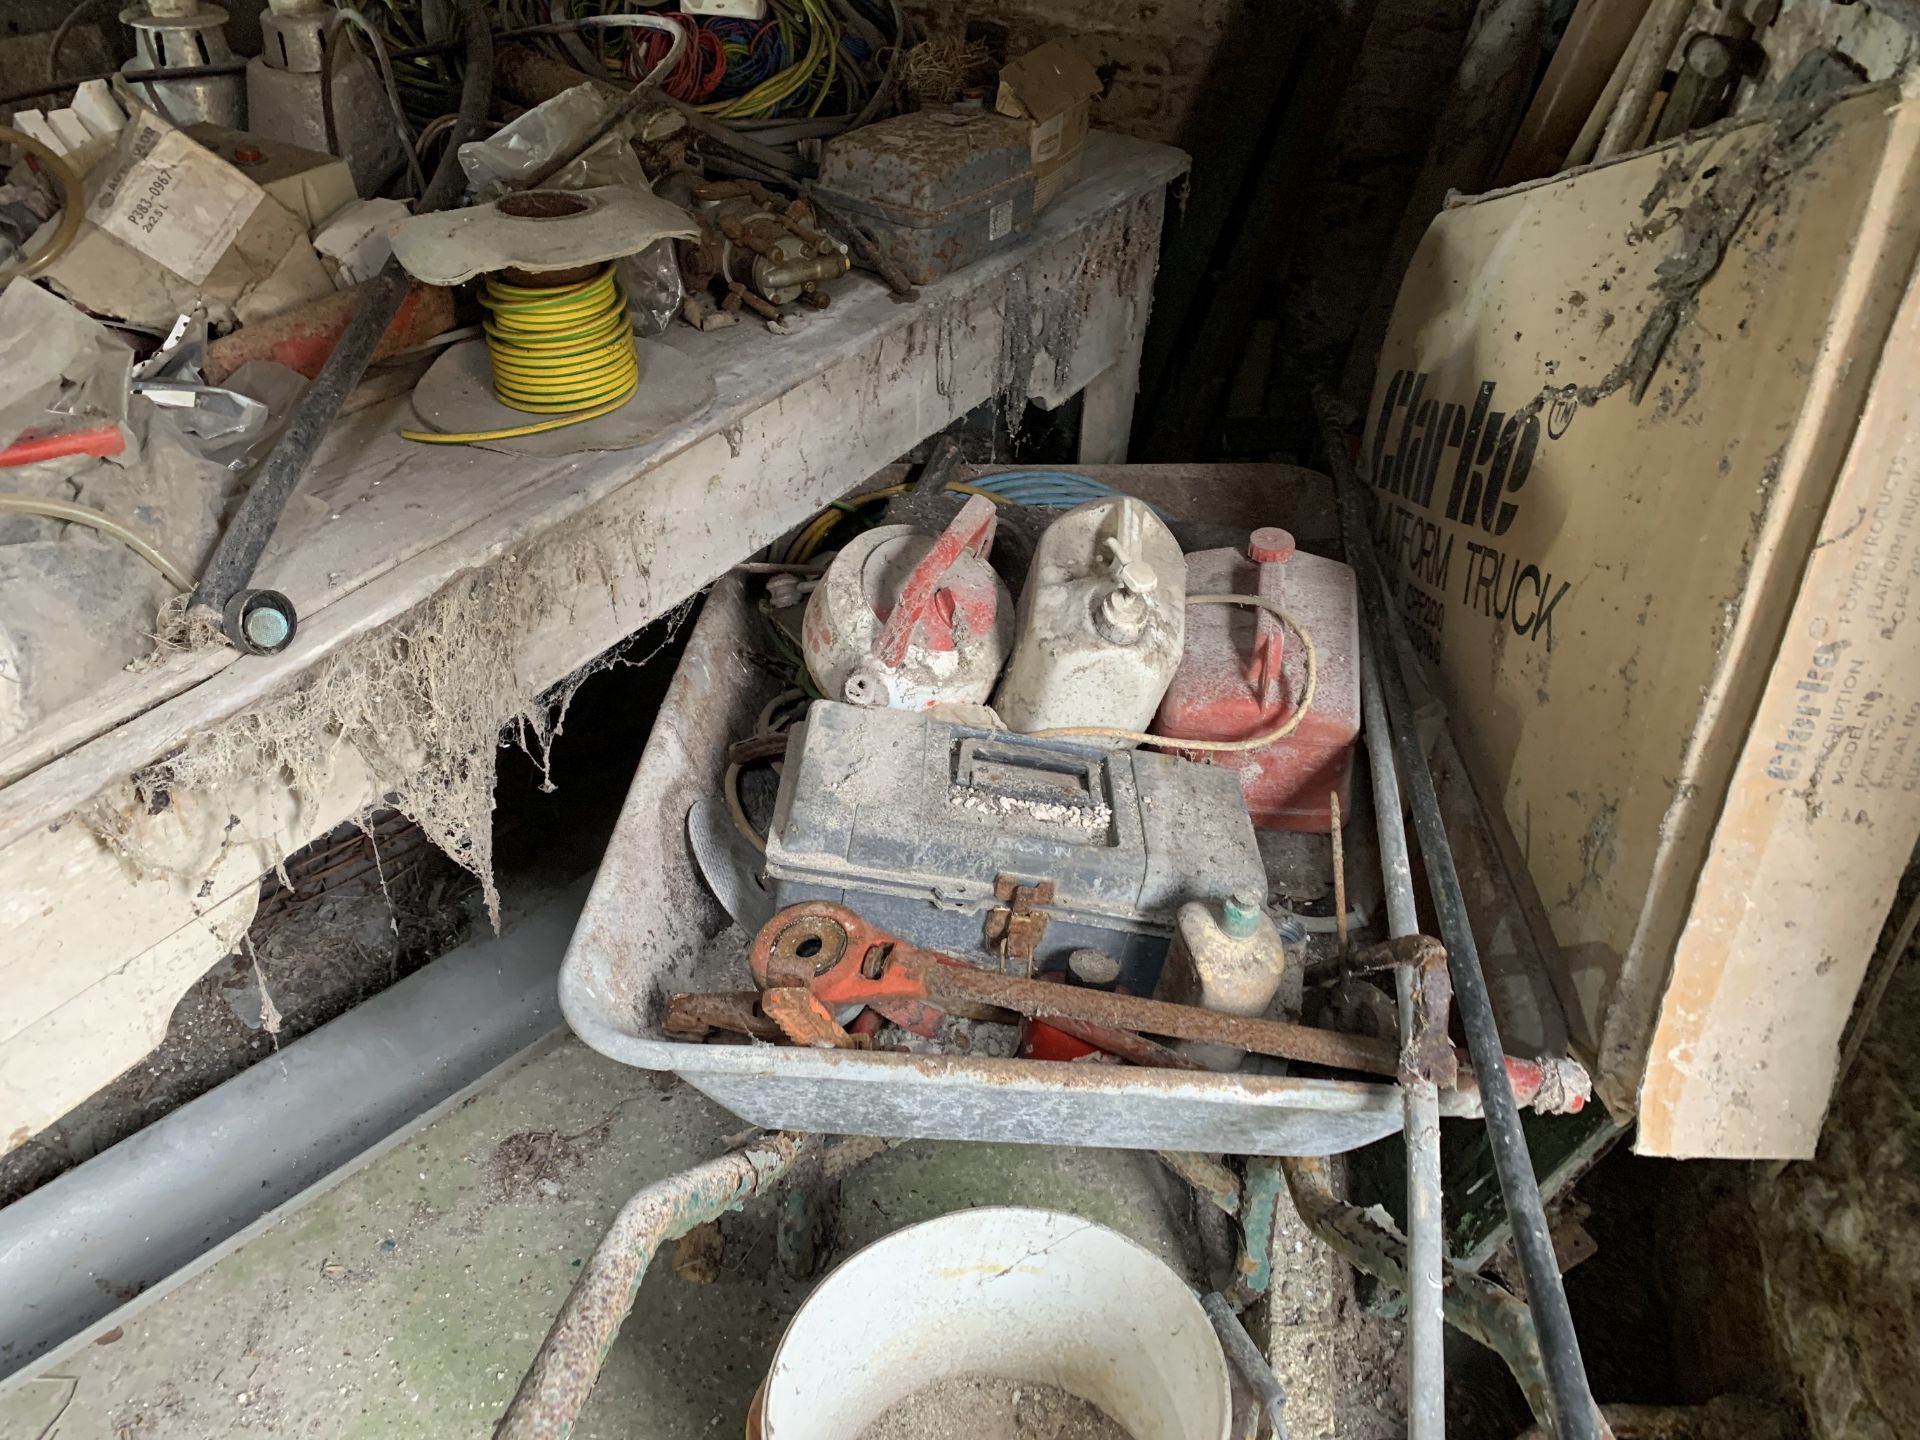 Contents of shed (NOT TABLE) - Image 4 of 4